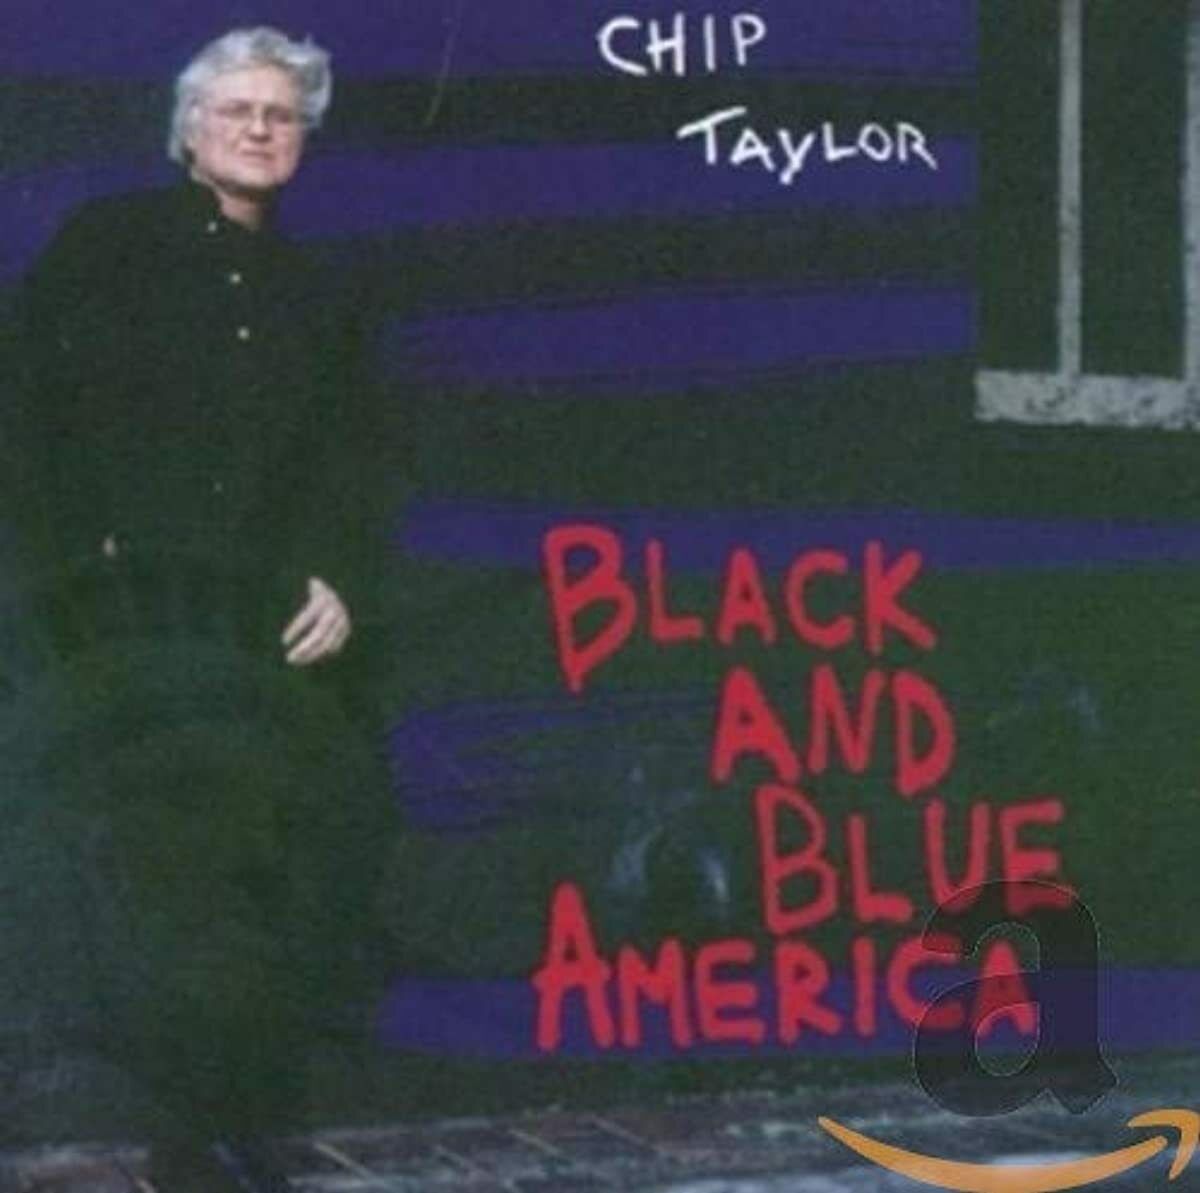 Black And Blue America CHIP TAYLOR (Audio CD)